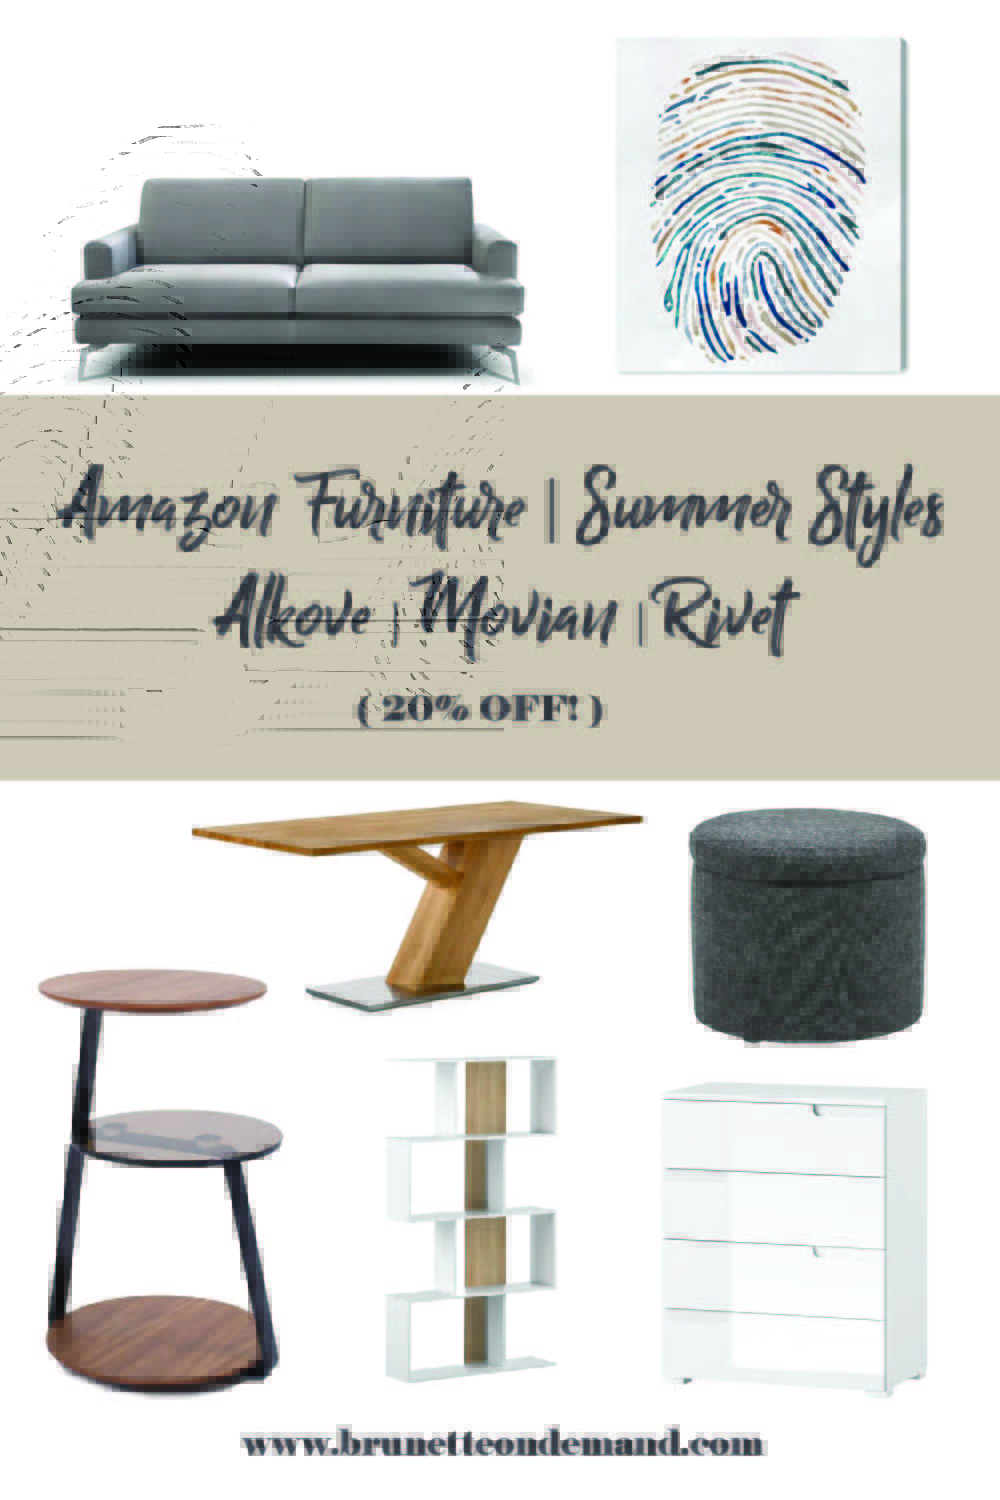 Amazing Amazon Furniture Summer Styles from Alkove, Movian and Rivet